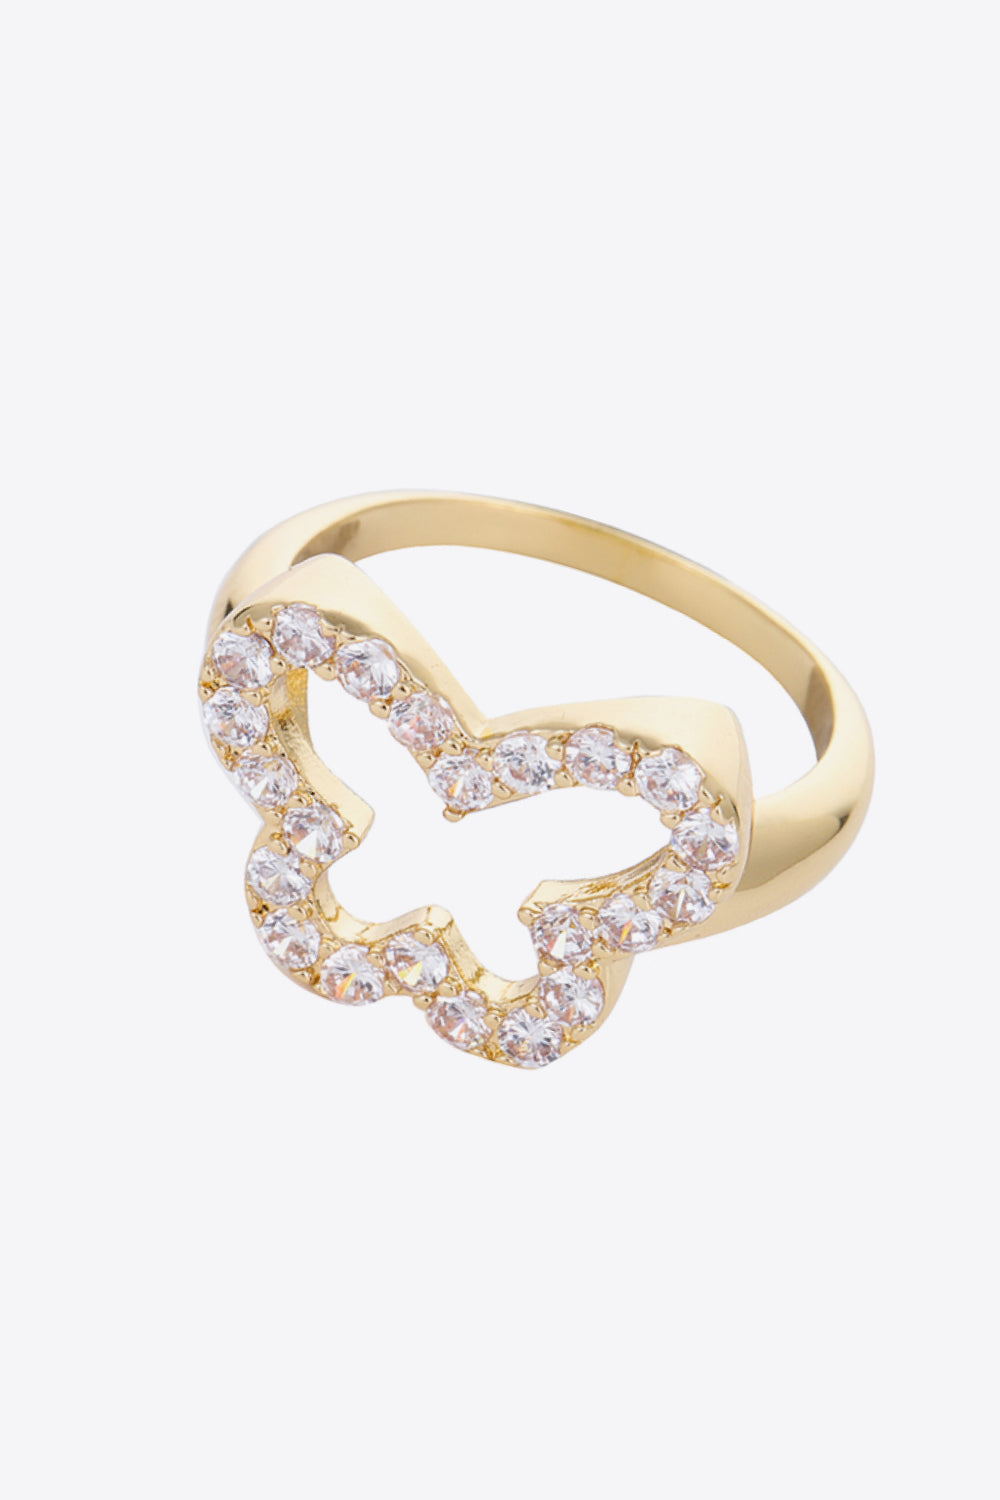 Rhinestone Butterfly-Shaped Ring - Adjustable Ti Amo I love you